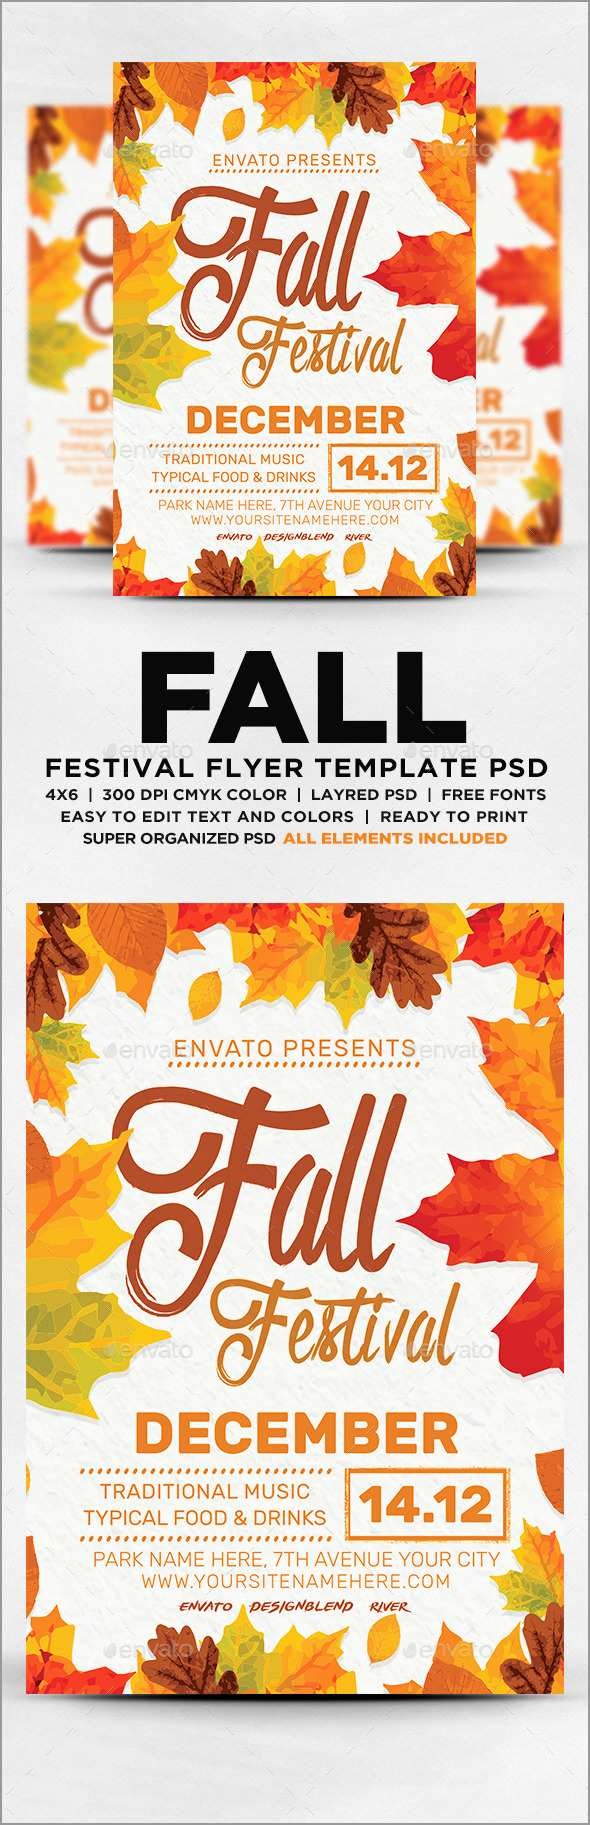 Unique Free Printable Fall Flyer Templates | Best Of Template - Free Printable Fall Flyer Templates